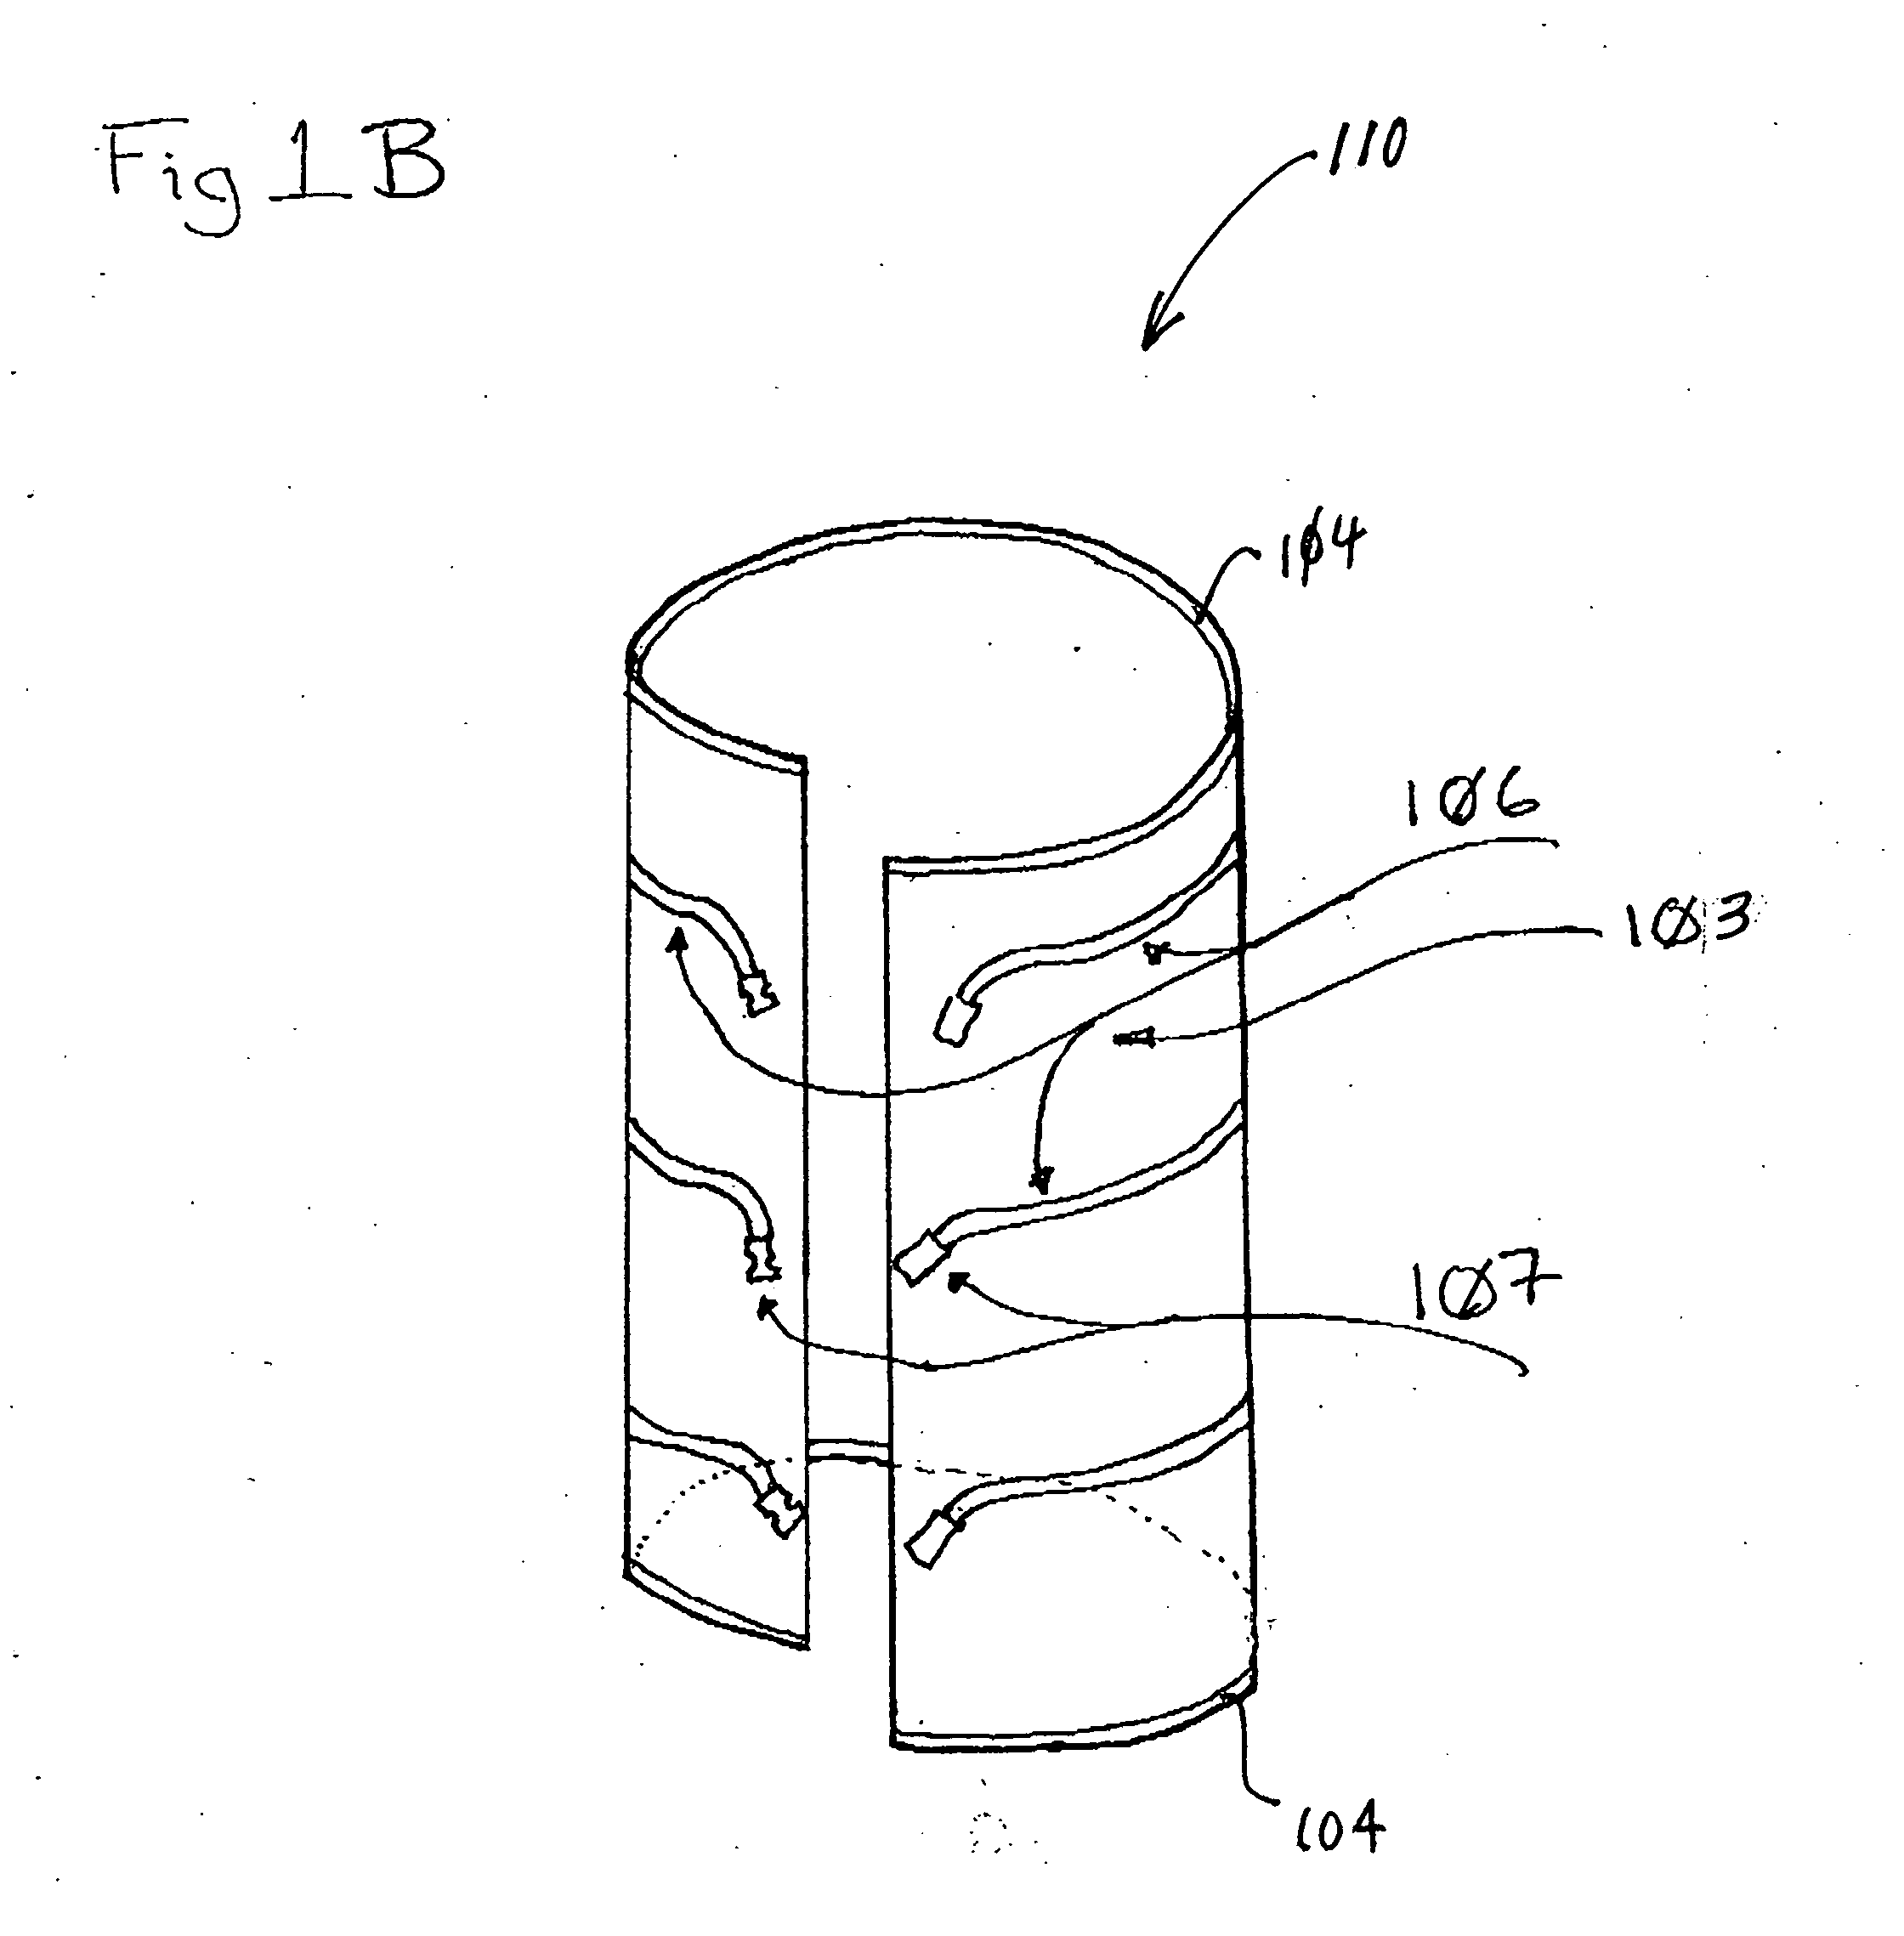 Insulating/protective covering for a container